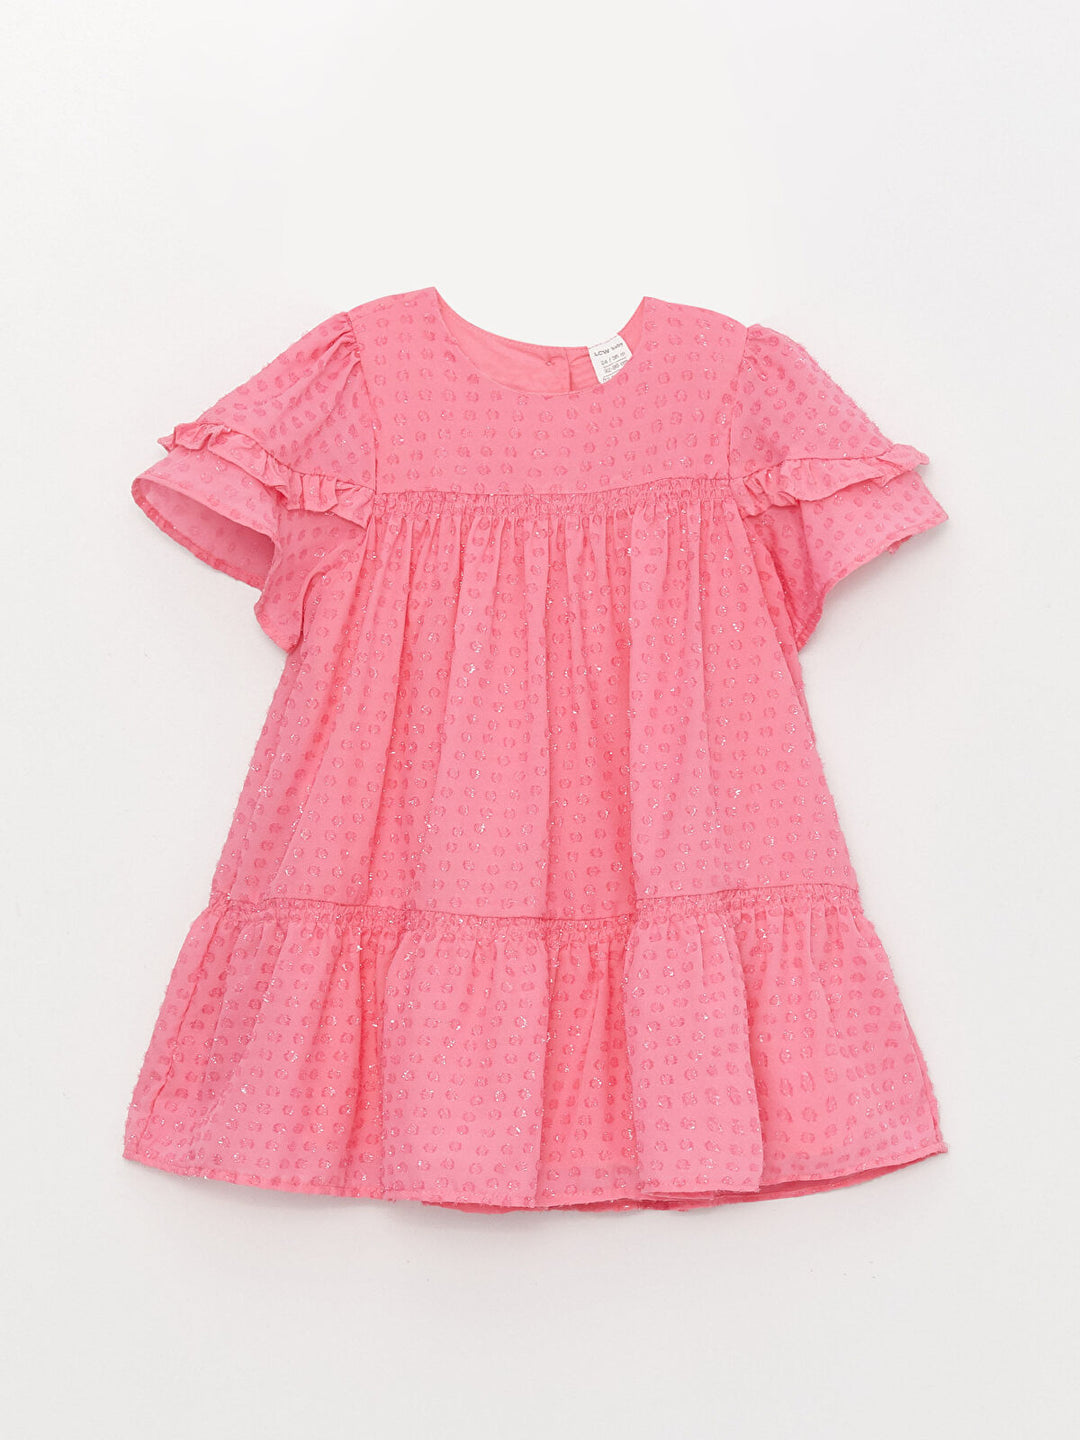 Pink Crew Neck Self-Patterned Baby Girl Dress